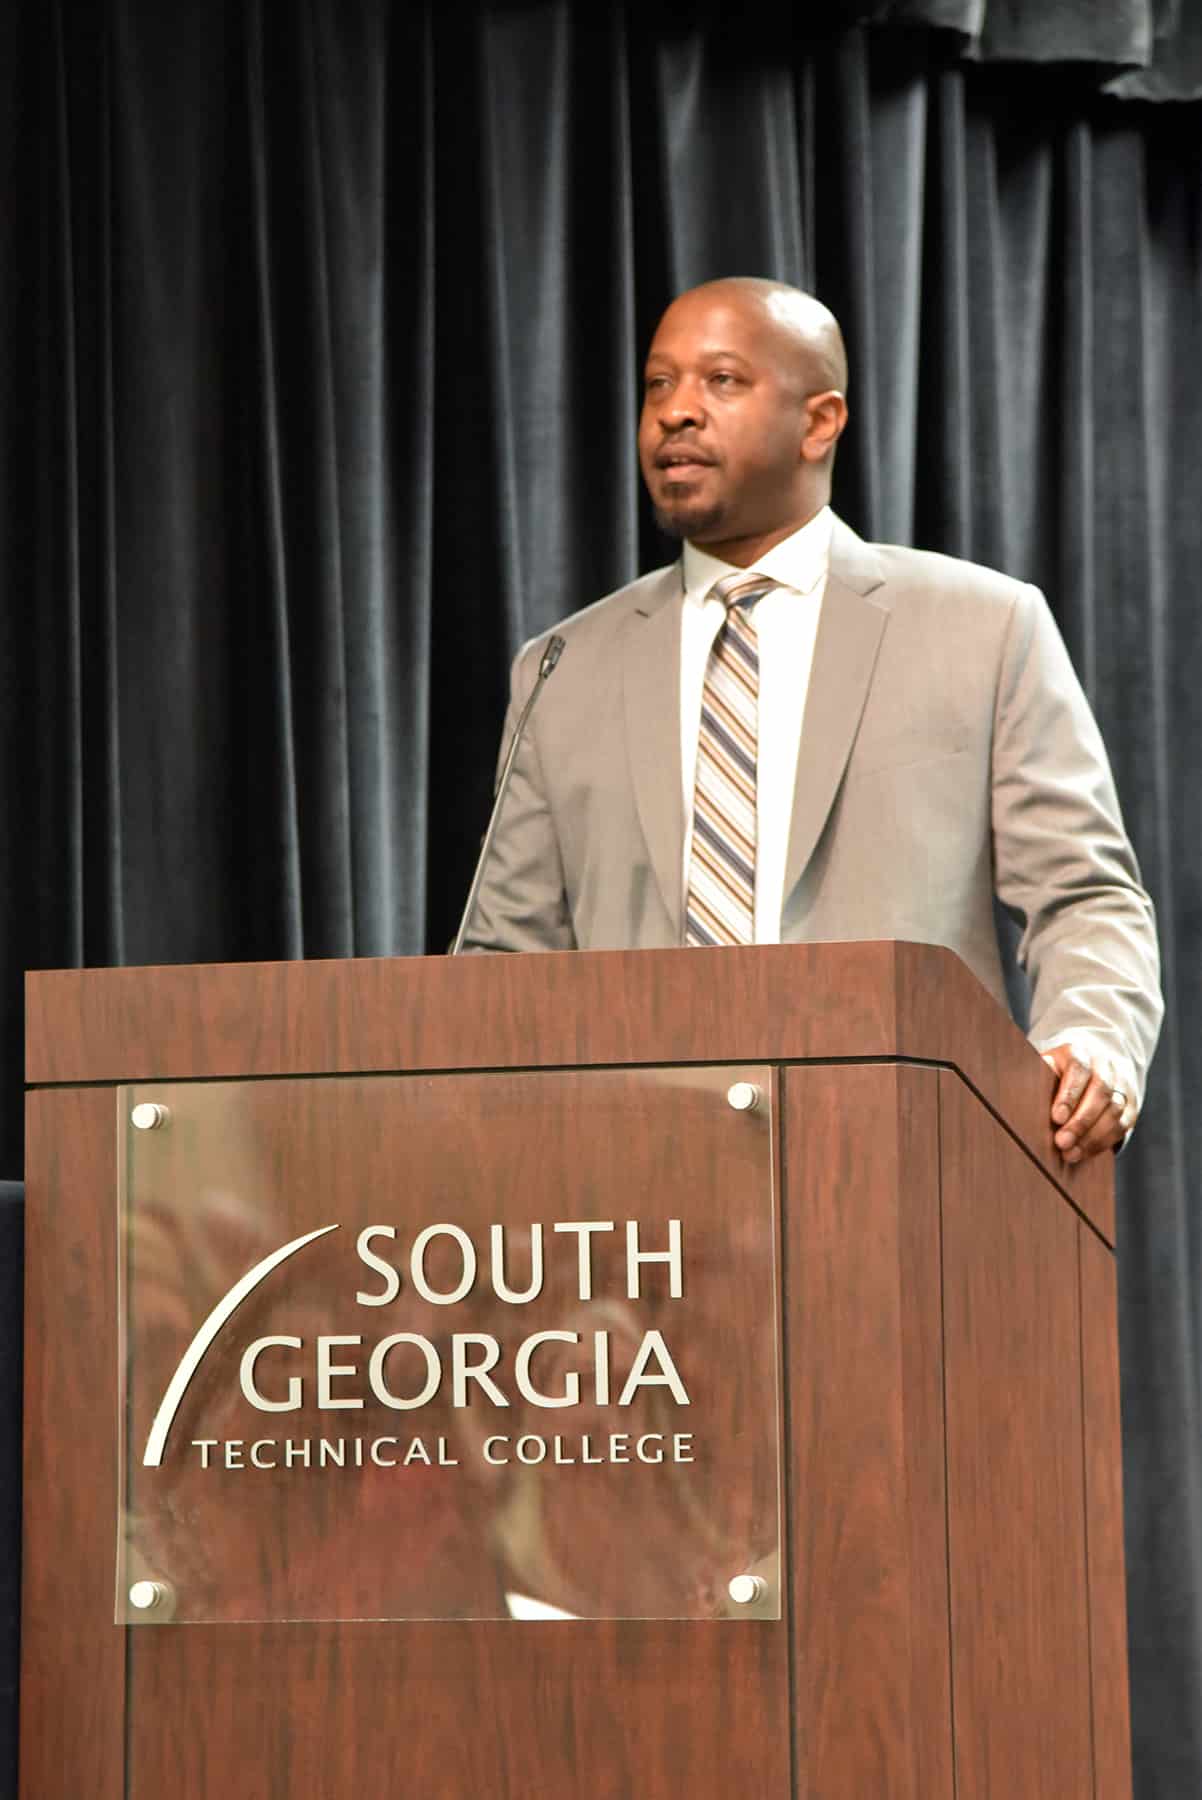 Ronny Roundtree stands behind a podium and delivers a speech during SGTC's Black History Month program